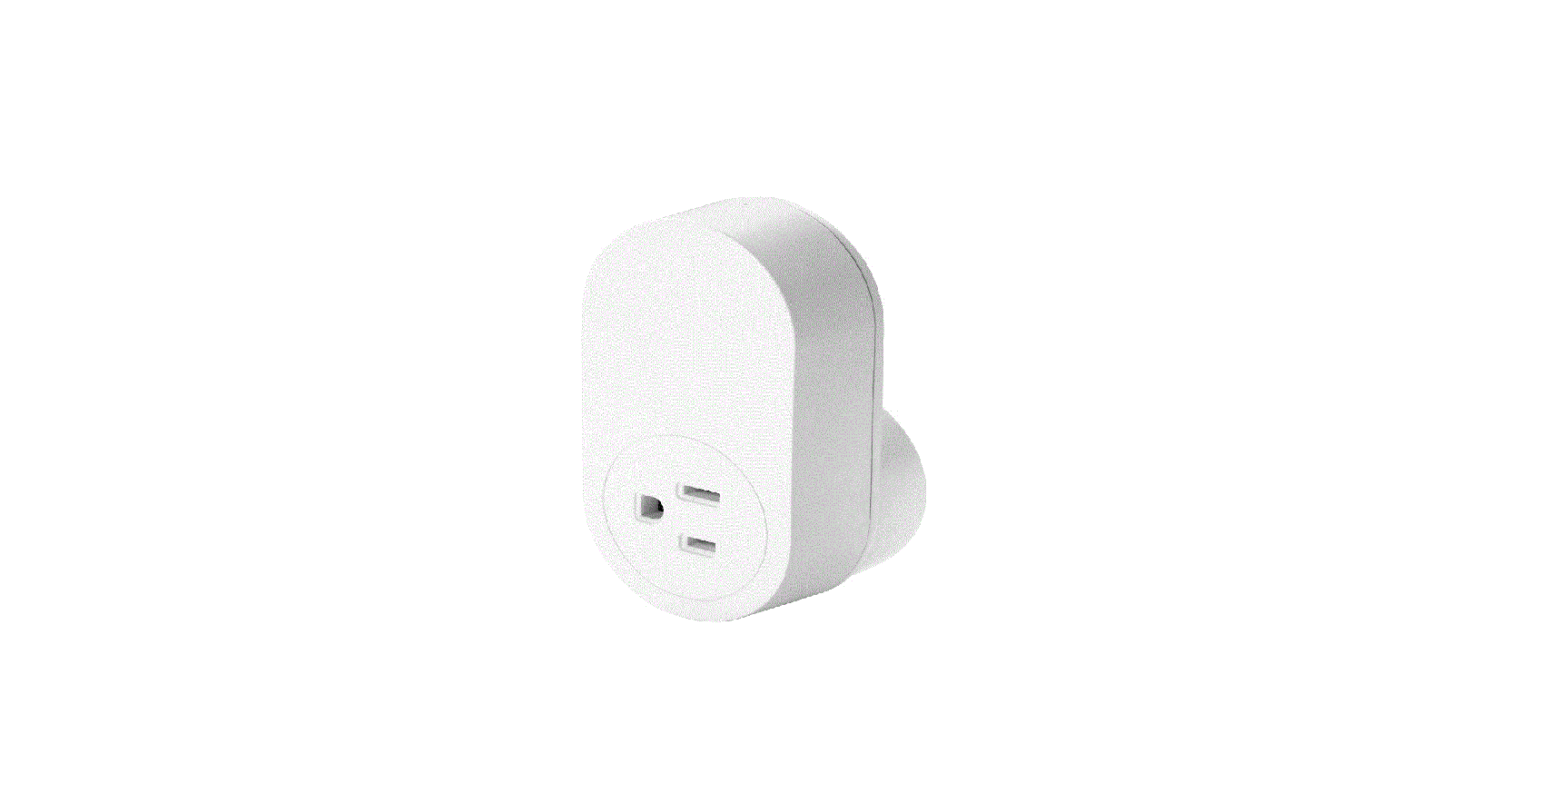 TRÅDFRI Wireless Control Outlet